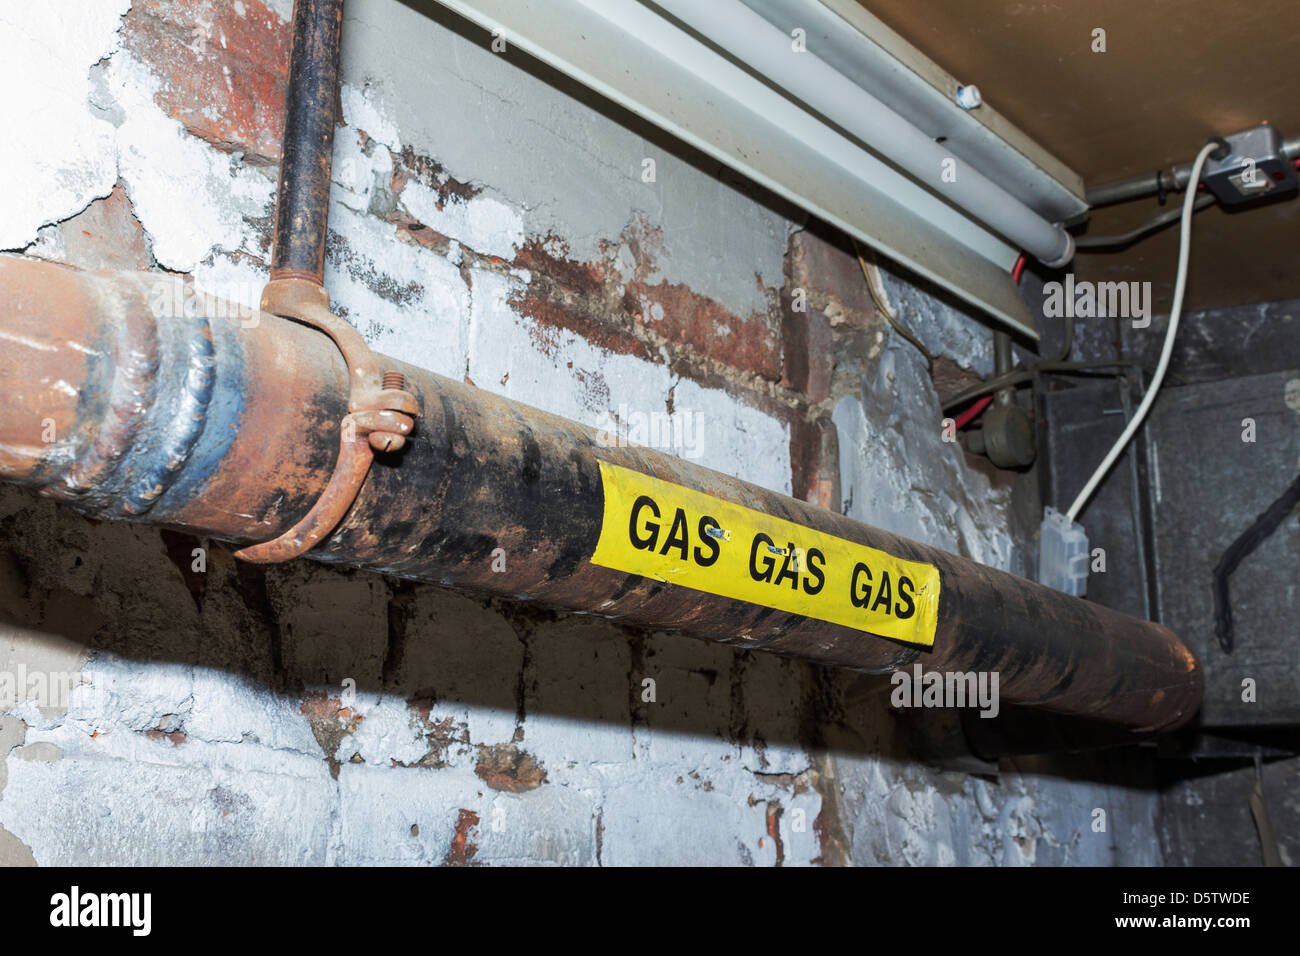 Industrial Gas Mains UK Stock Photo